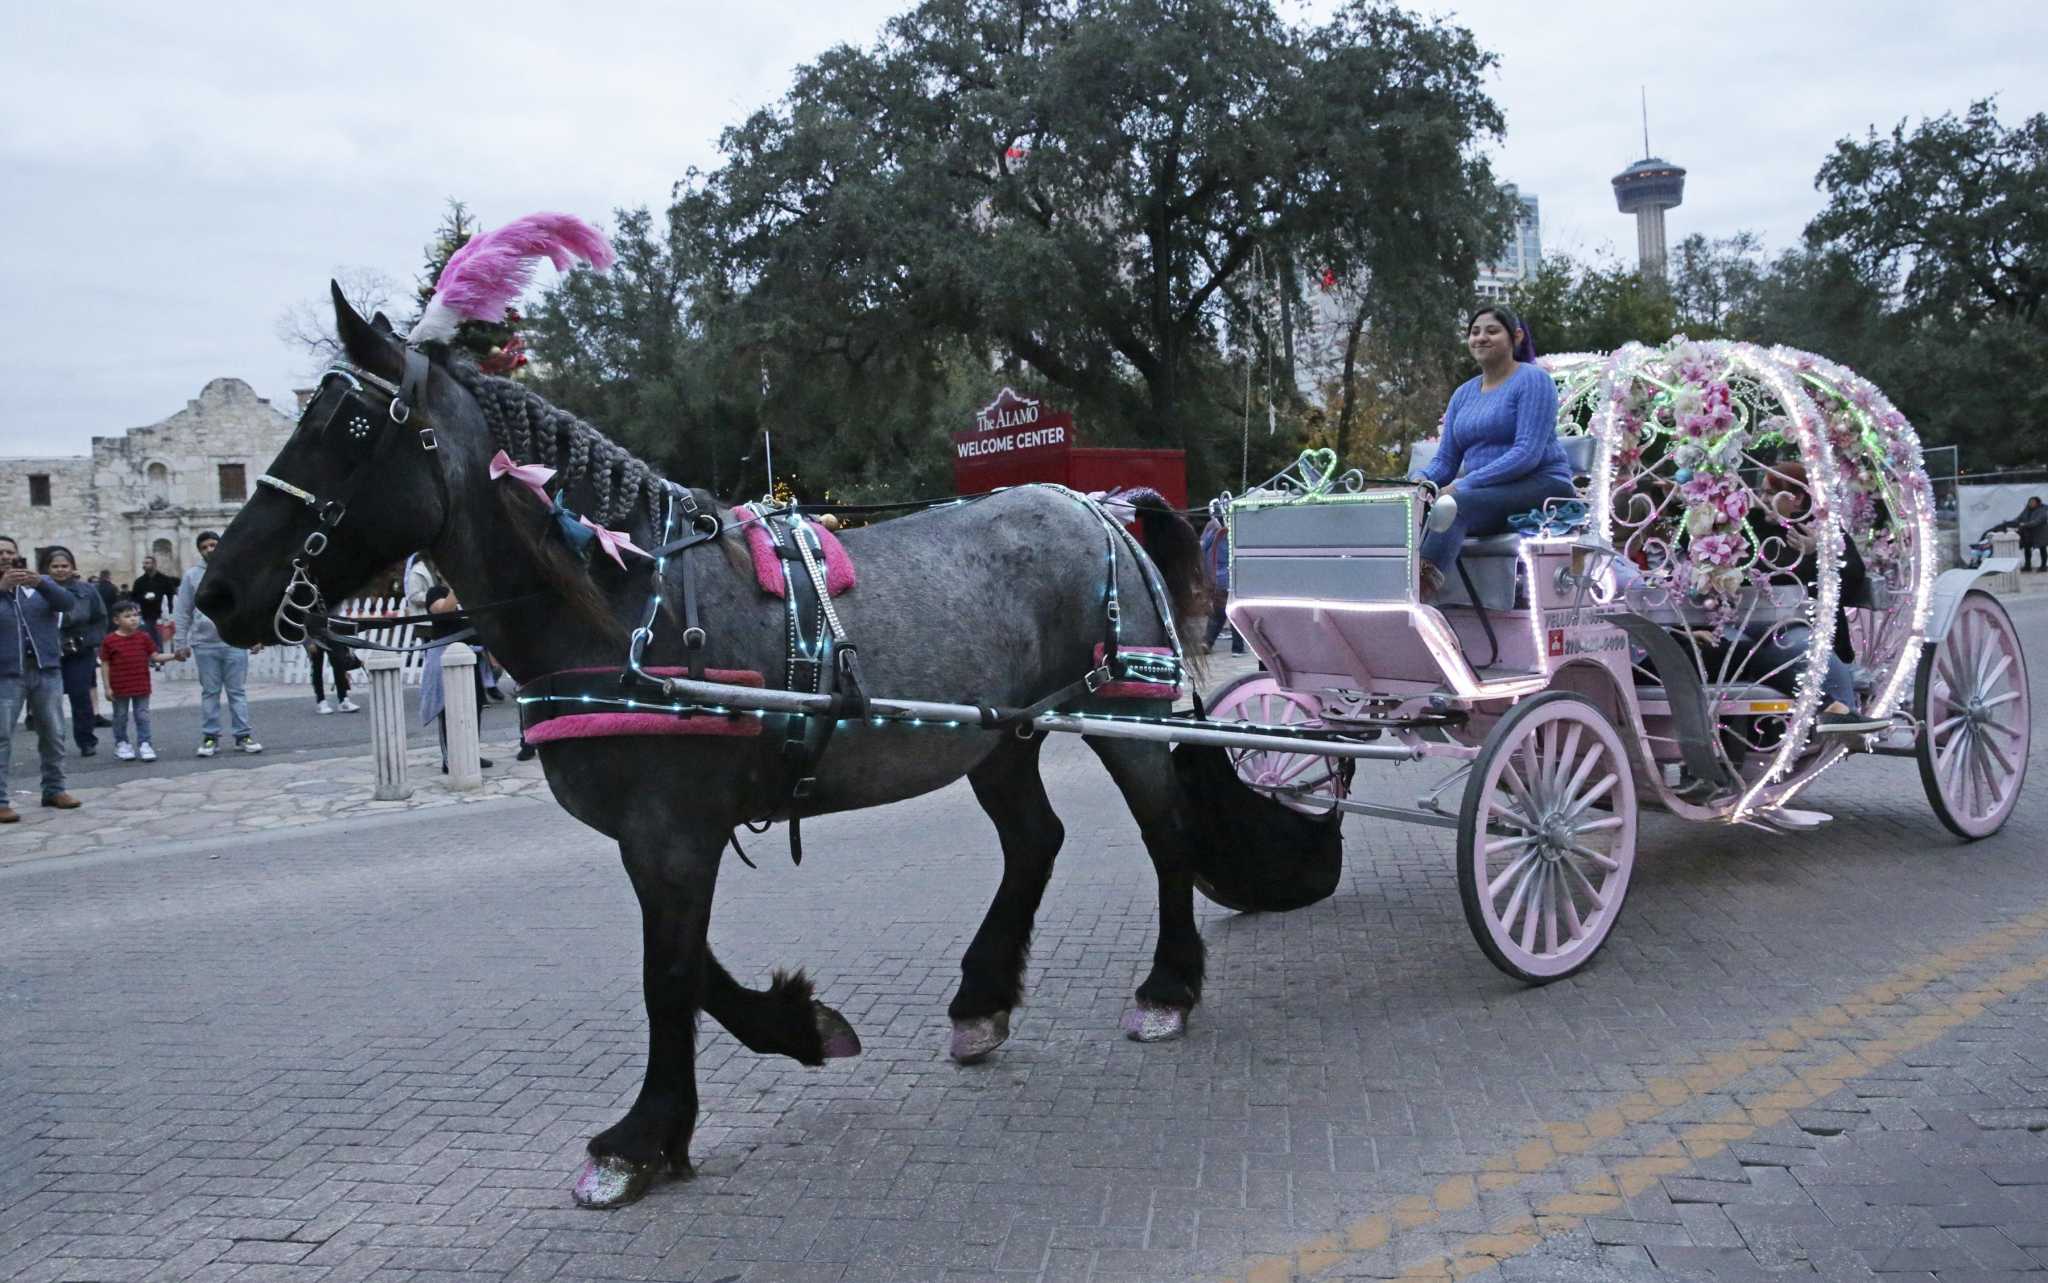 San Antonio must end antiquated tradition of horse-drawn carriages